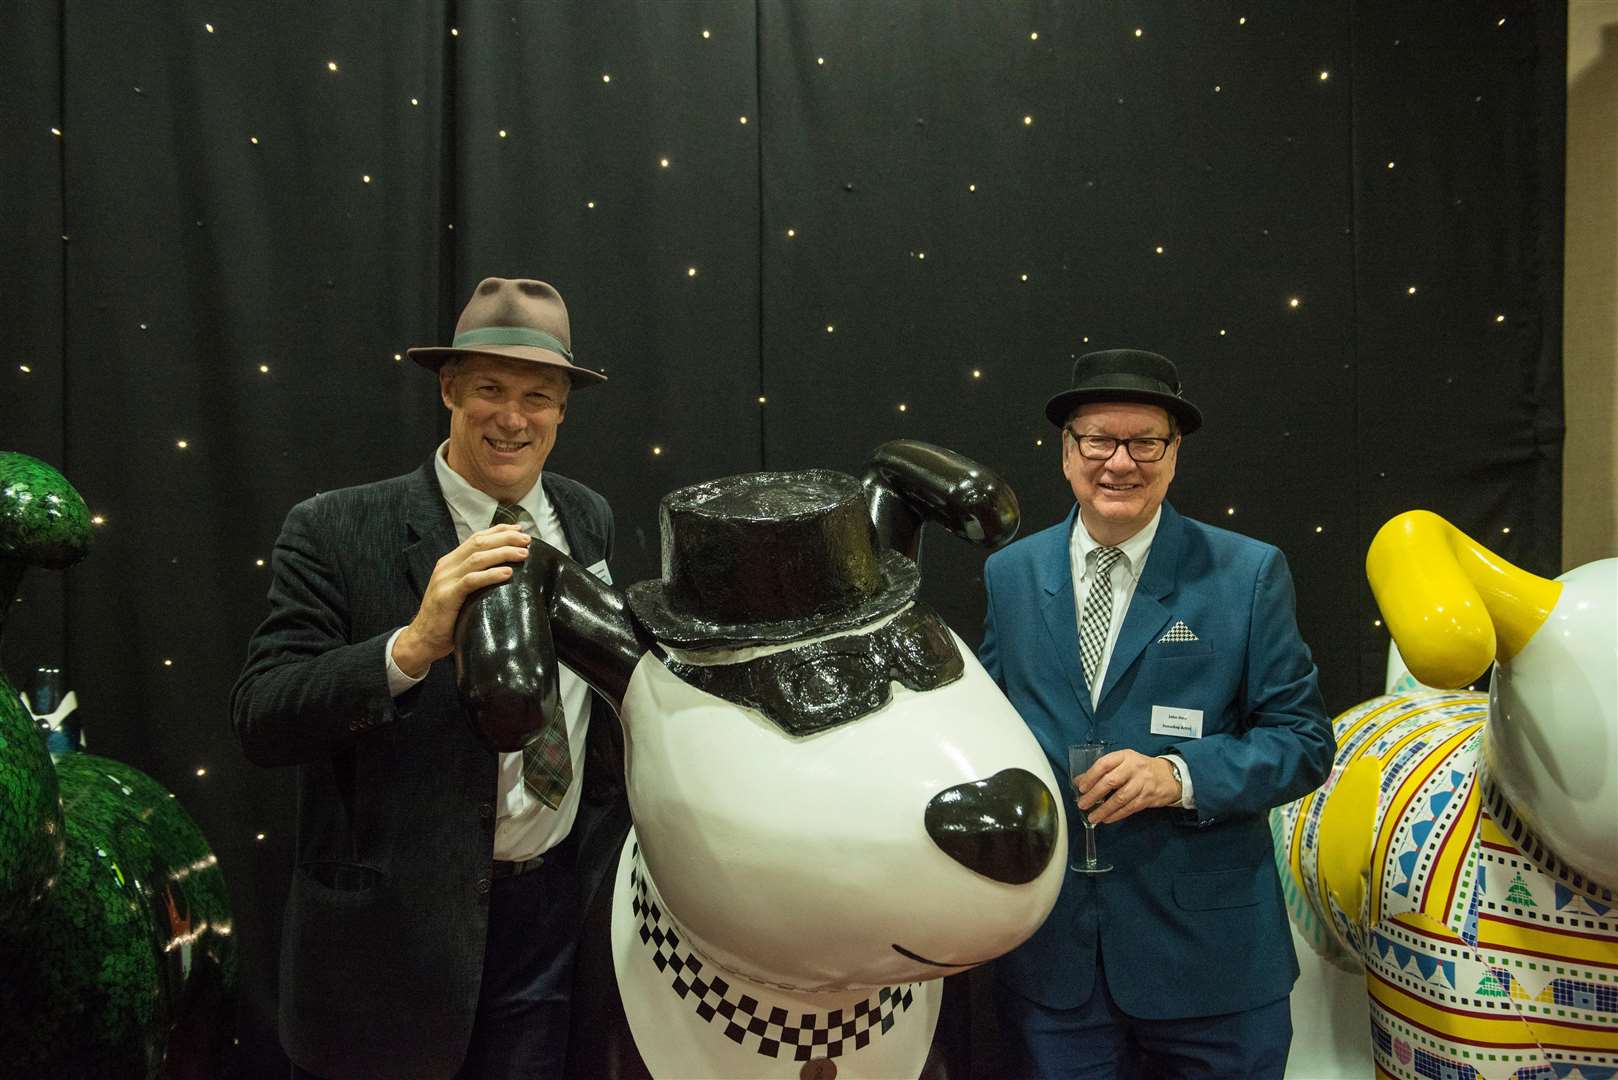 John Sims alongside his creation, the 2 Tone Ska Dog, which sold for £5,200